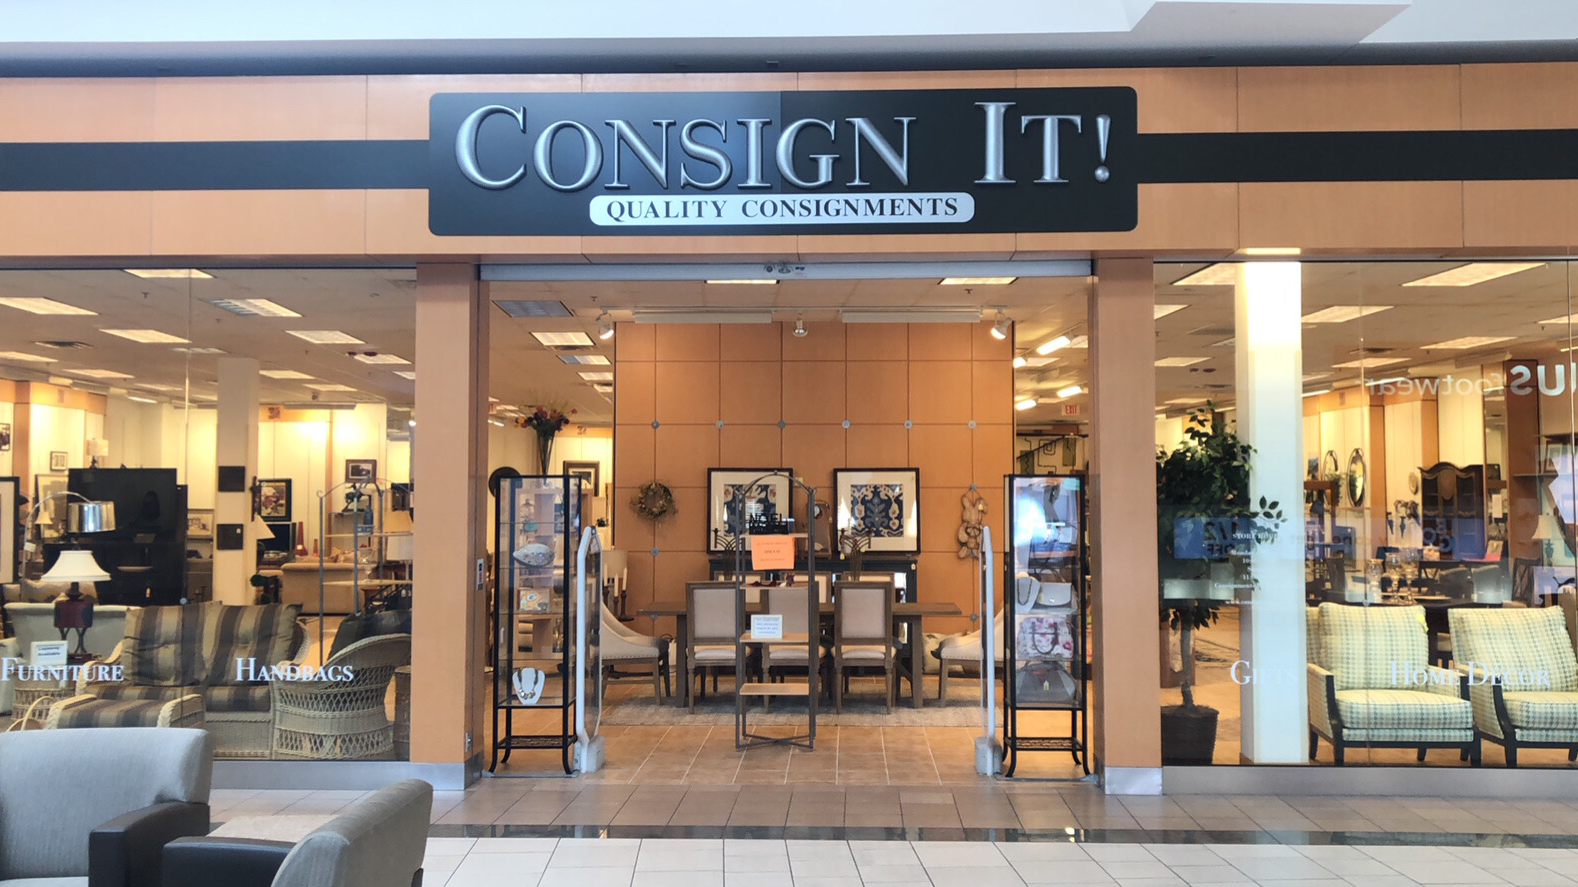 Consign It! Fashion Consignments